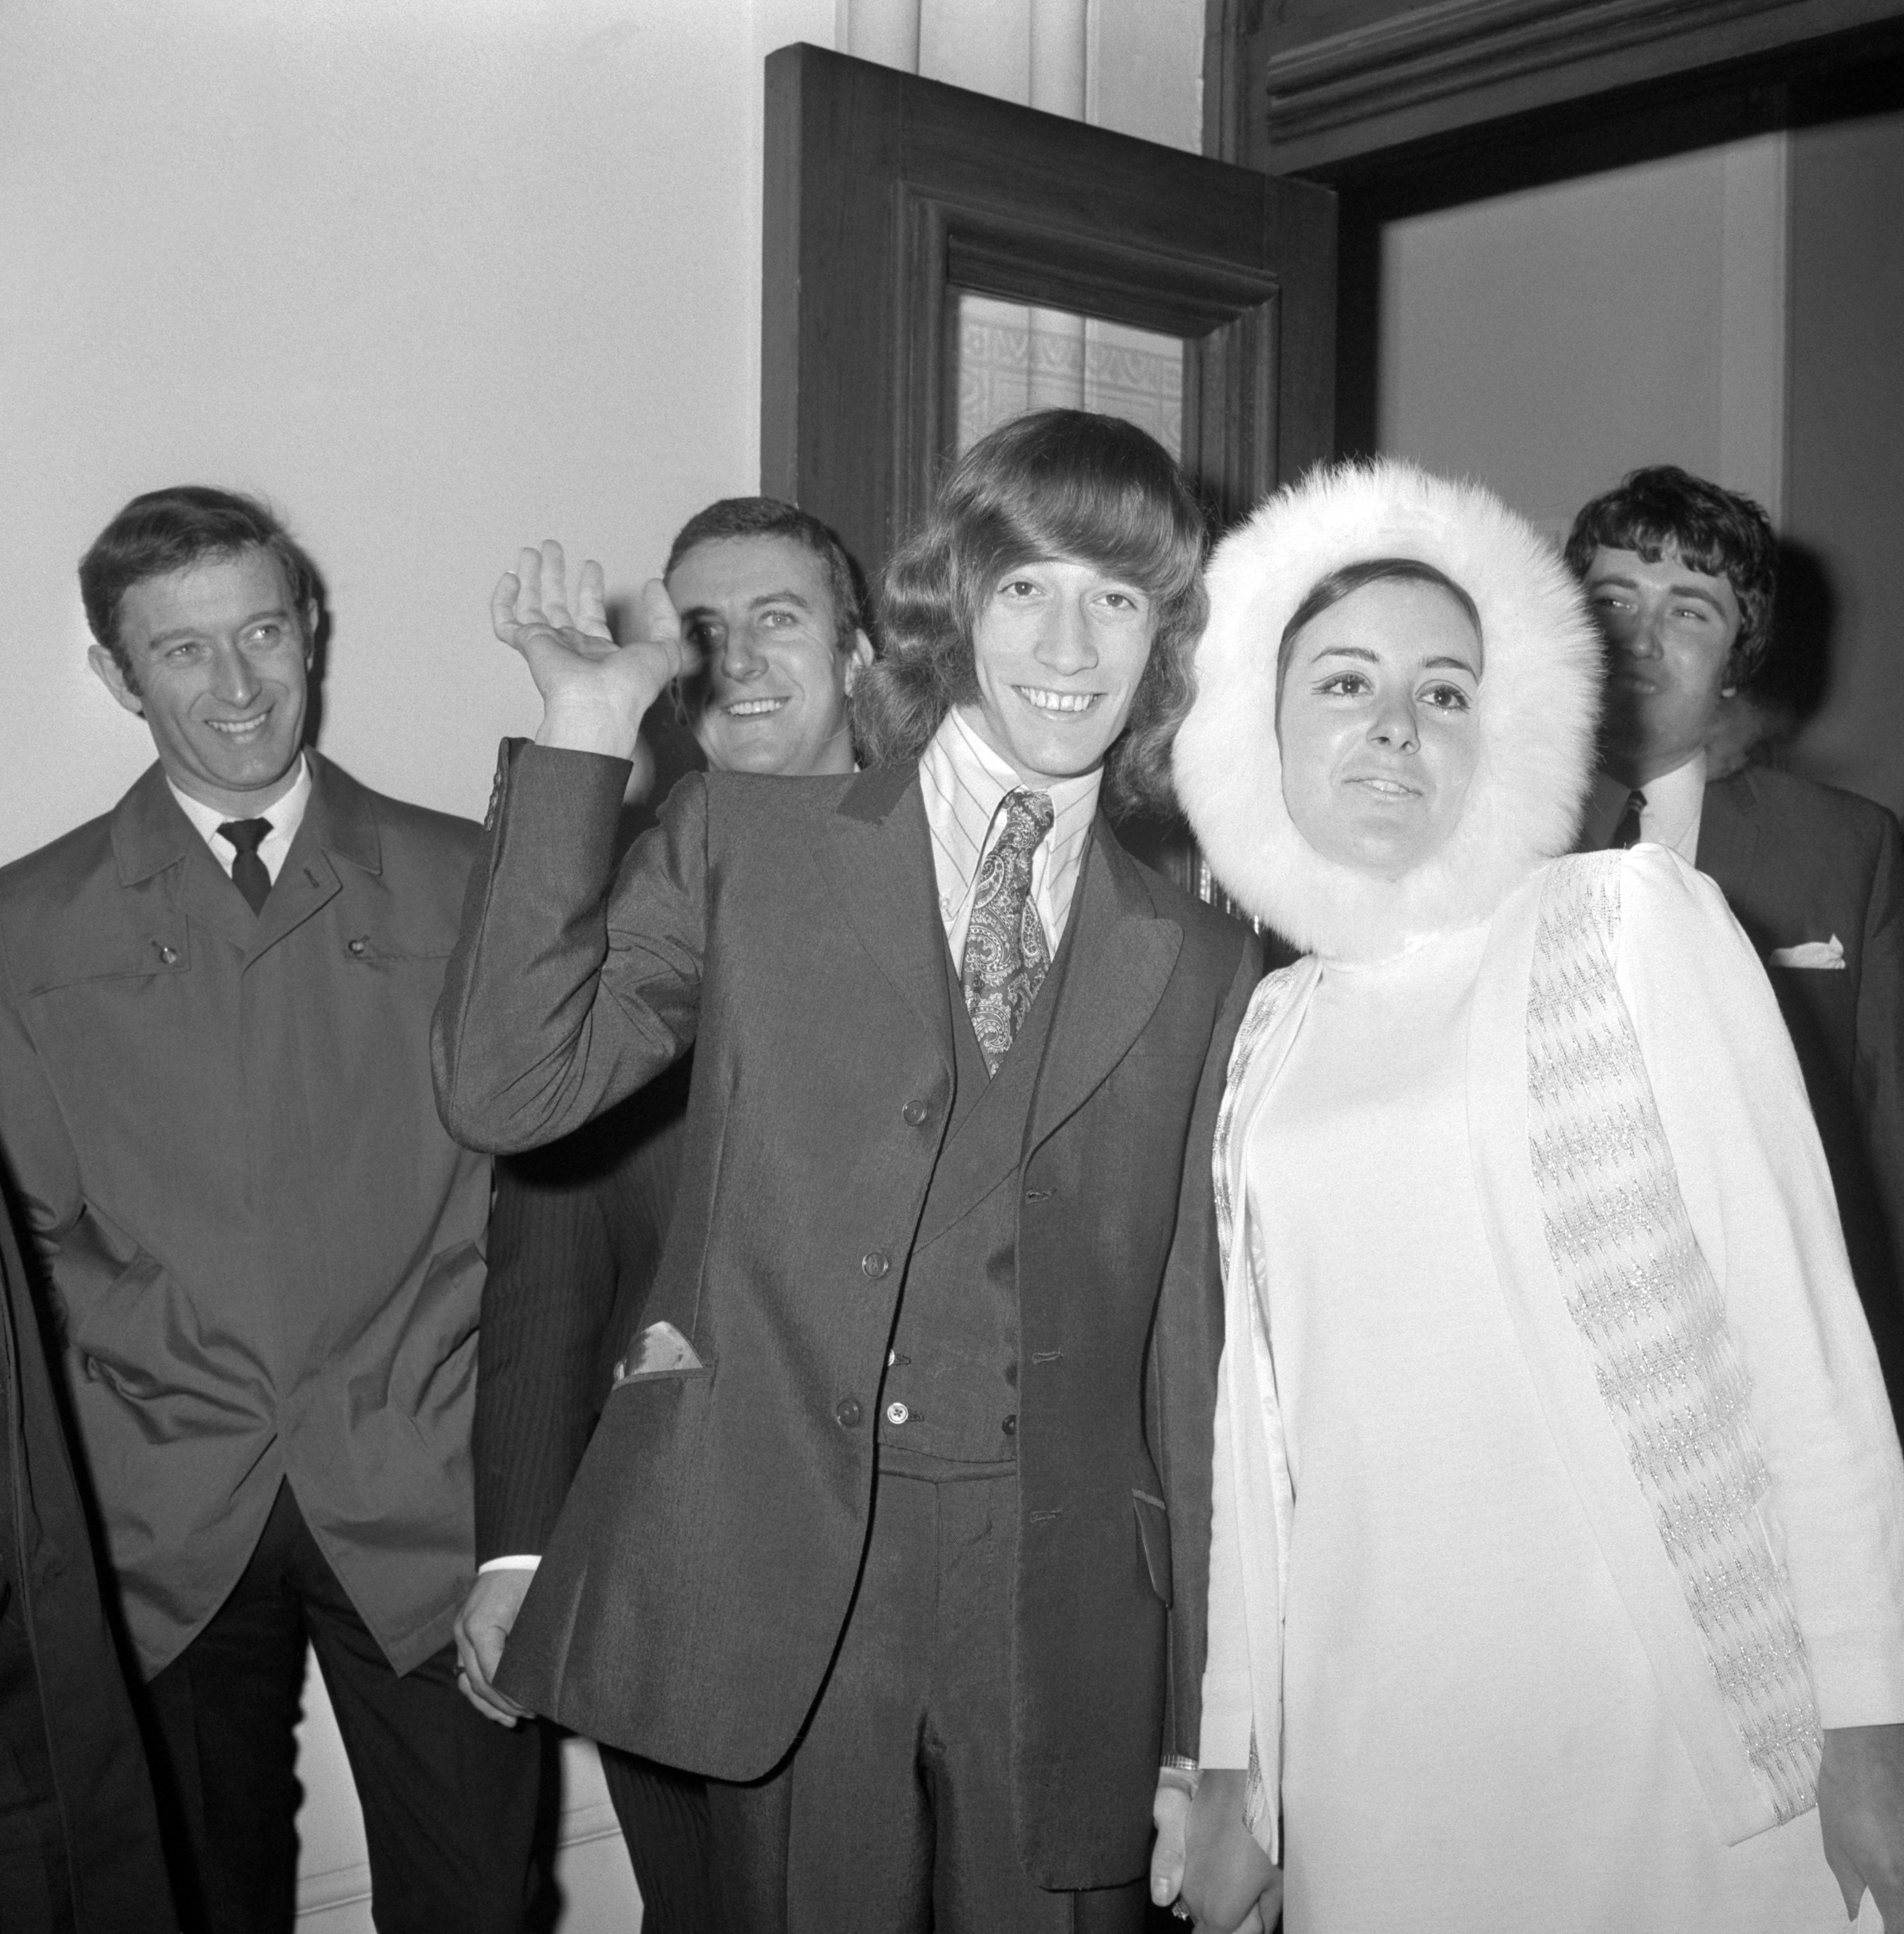 A wave from 19 year old Robin Gibb, member of the Bee Gees, as he leaves Caxton Hall register office, London, with his fur-bonneted bride after their wedding. She was 21 year old Molly Hullis, whom Mr Gibb met two years ago shortly after the Bee Gees came to the UK from Australia. The couple had both survived the Hither Green rail crash, which killed 49 people on 5 November 1967. They divorced in 1980.